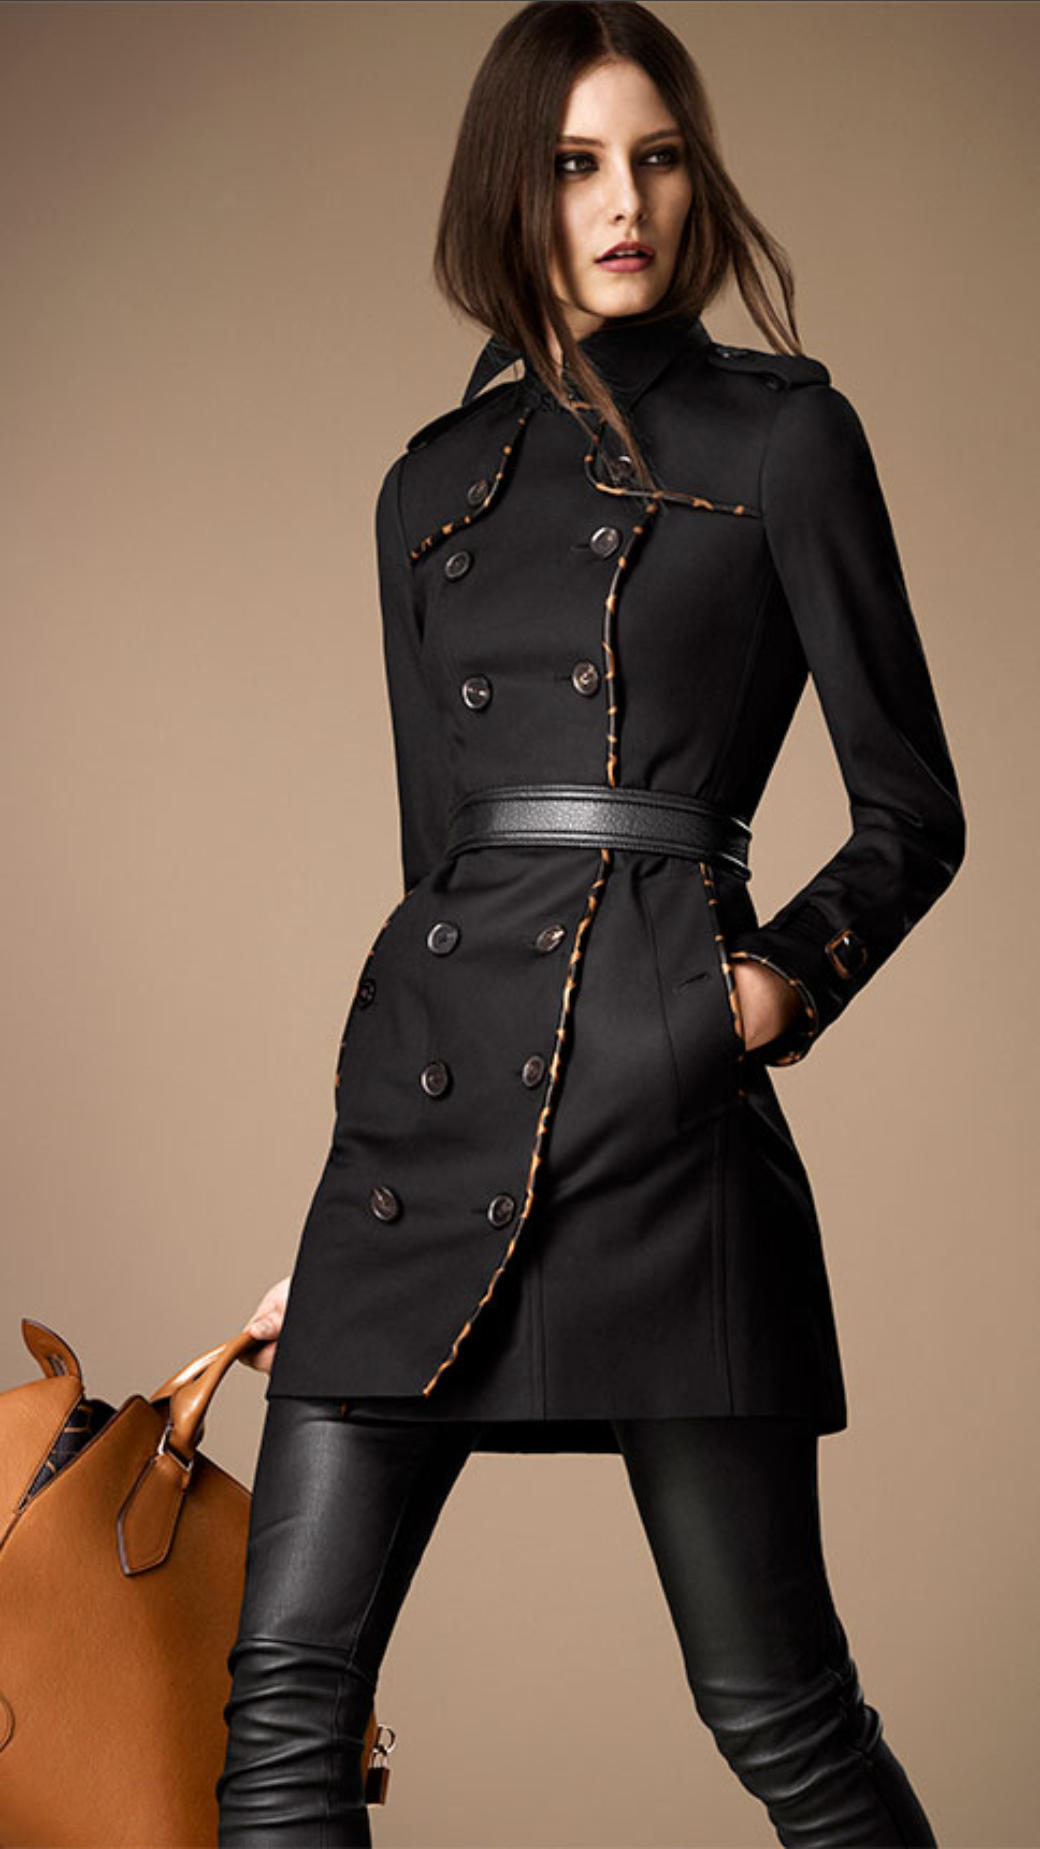 Lyst - Burberry Midlength Animal Print Leather Trim Trench Coat in Black